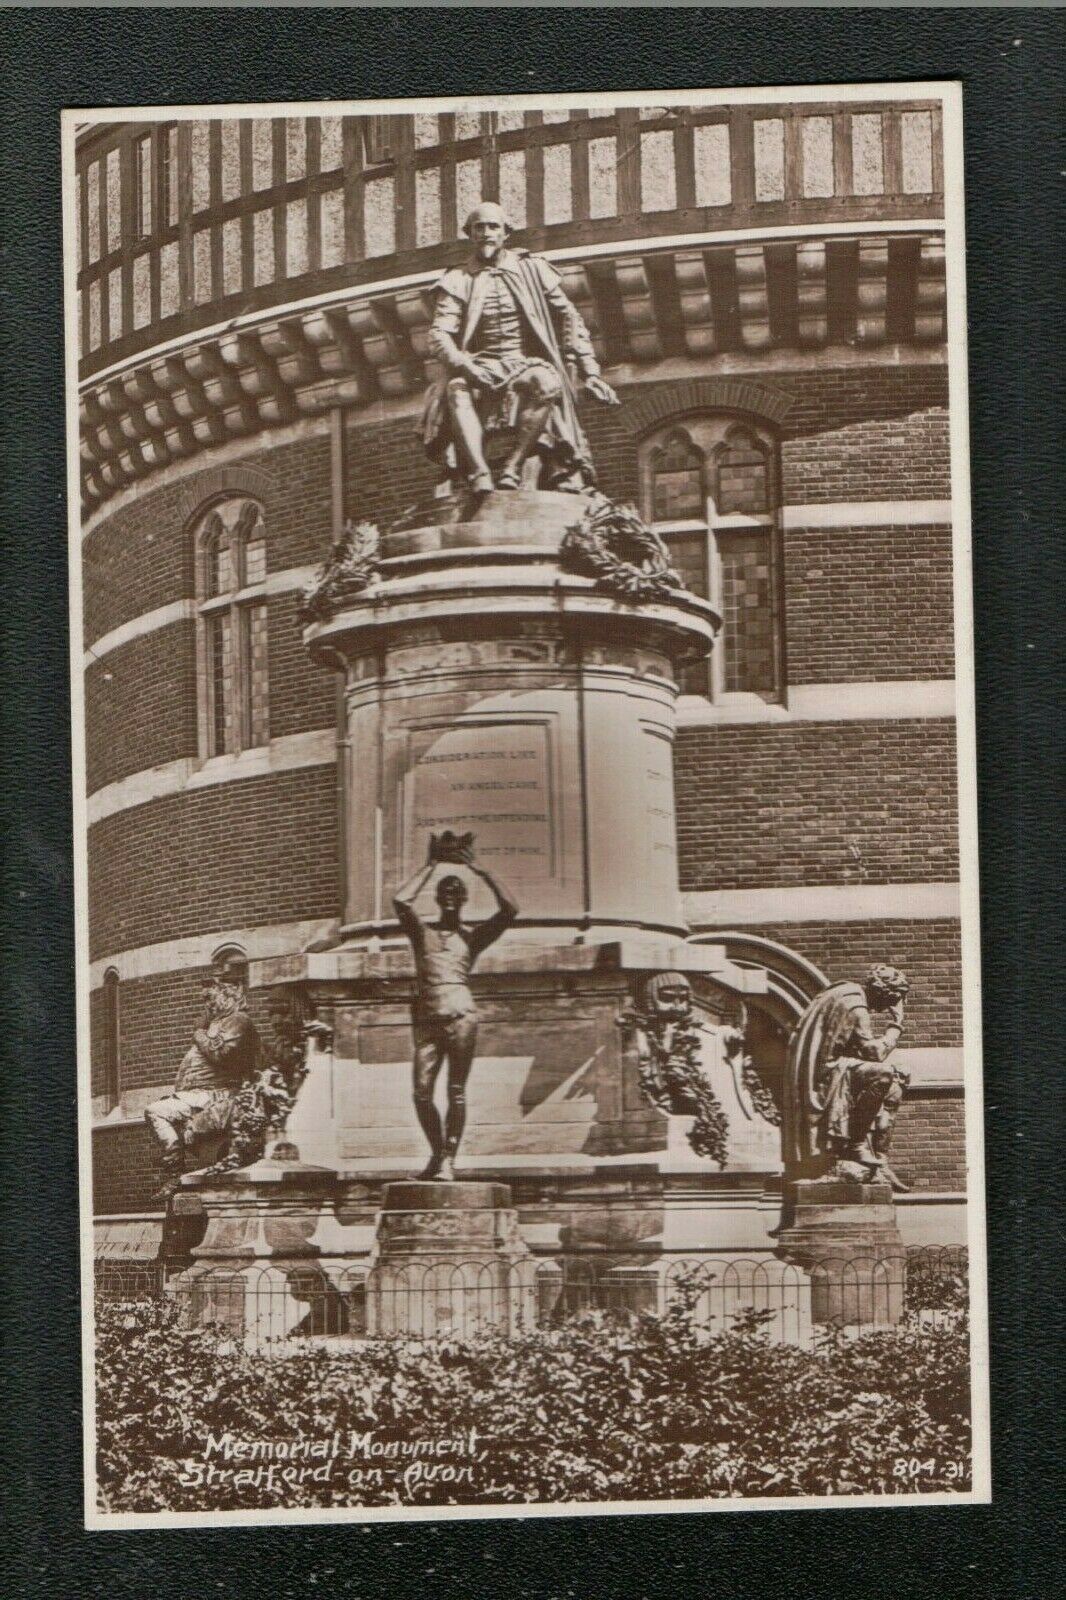 House Clearance - Memorial Monument Stratford on Avon 1940's ? Service